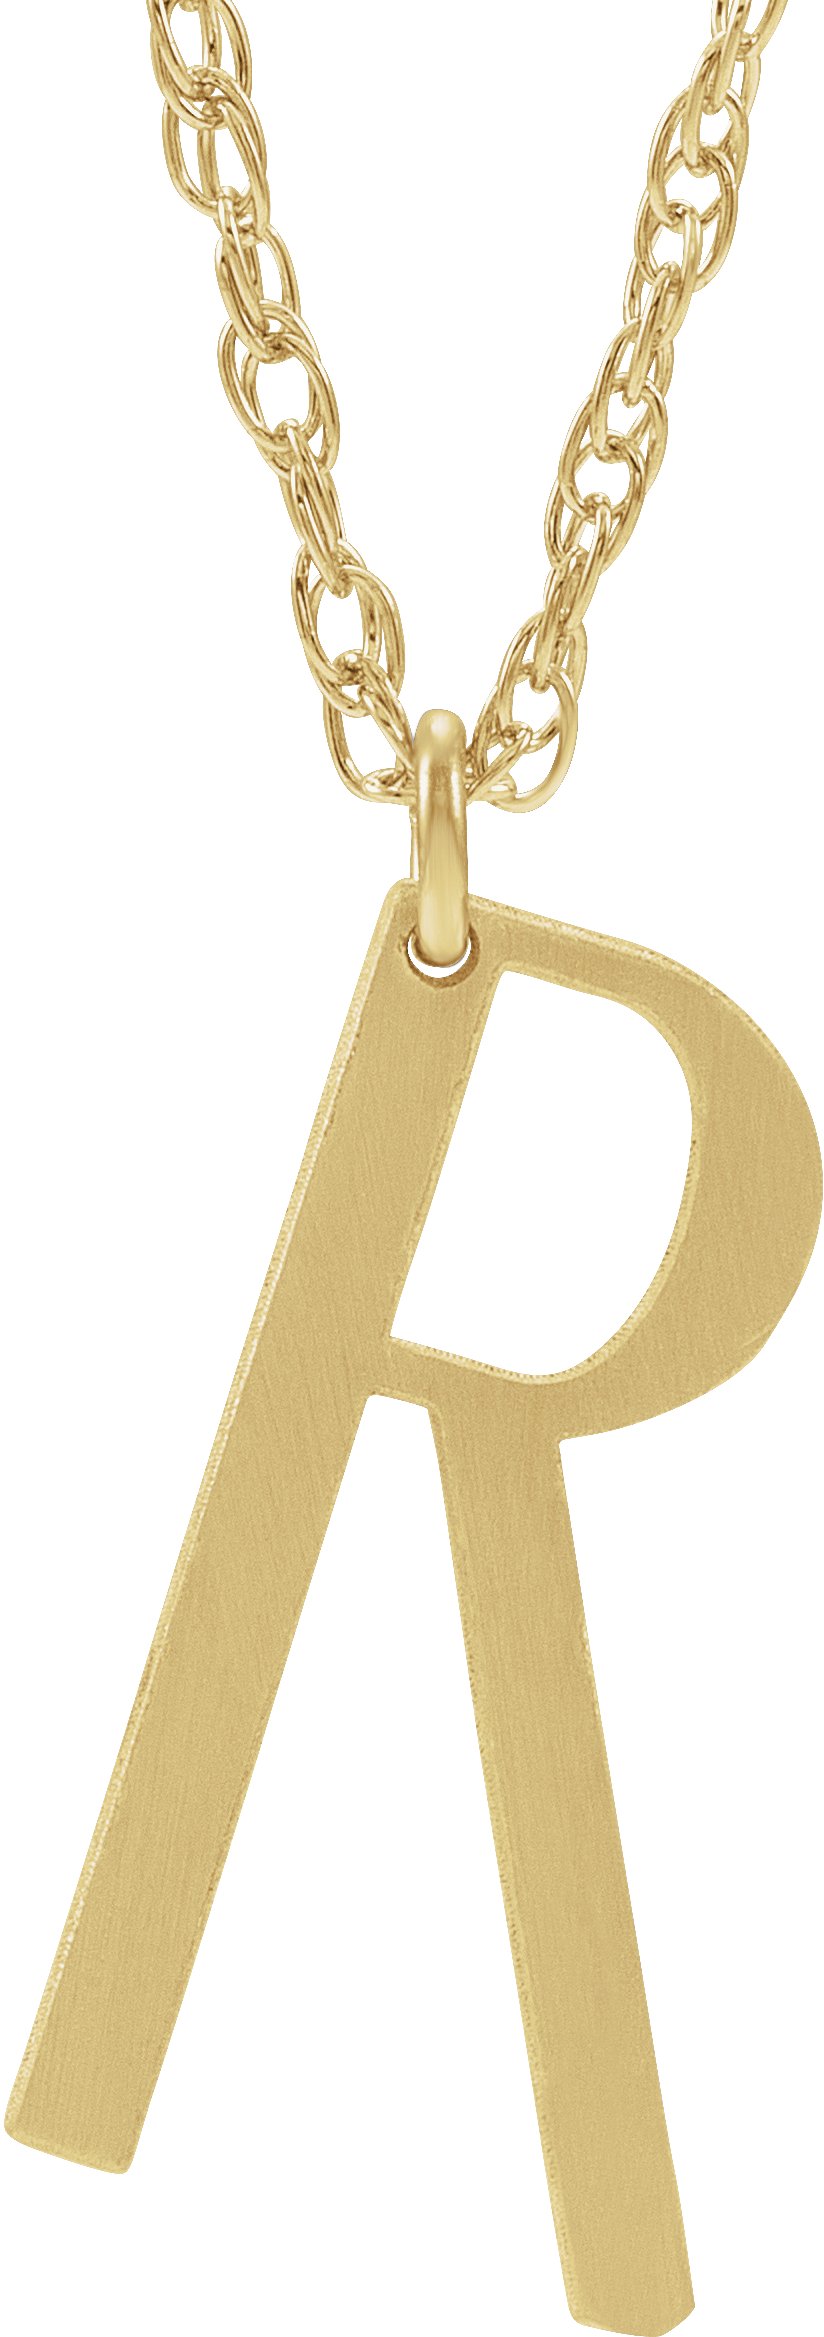 14K Yellow Gold-Plated Sterling Silver Block Initial R 16-18" Necklace with Brush Finish